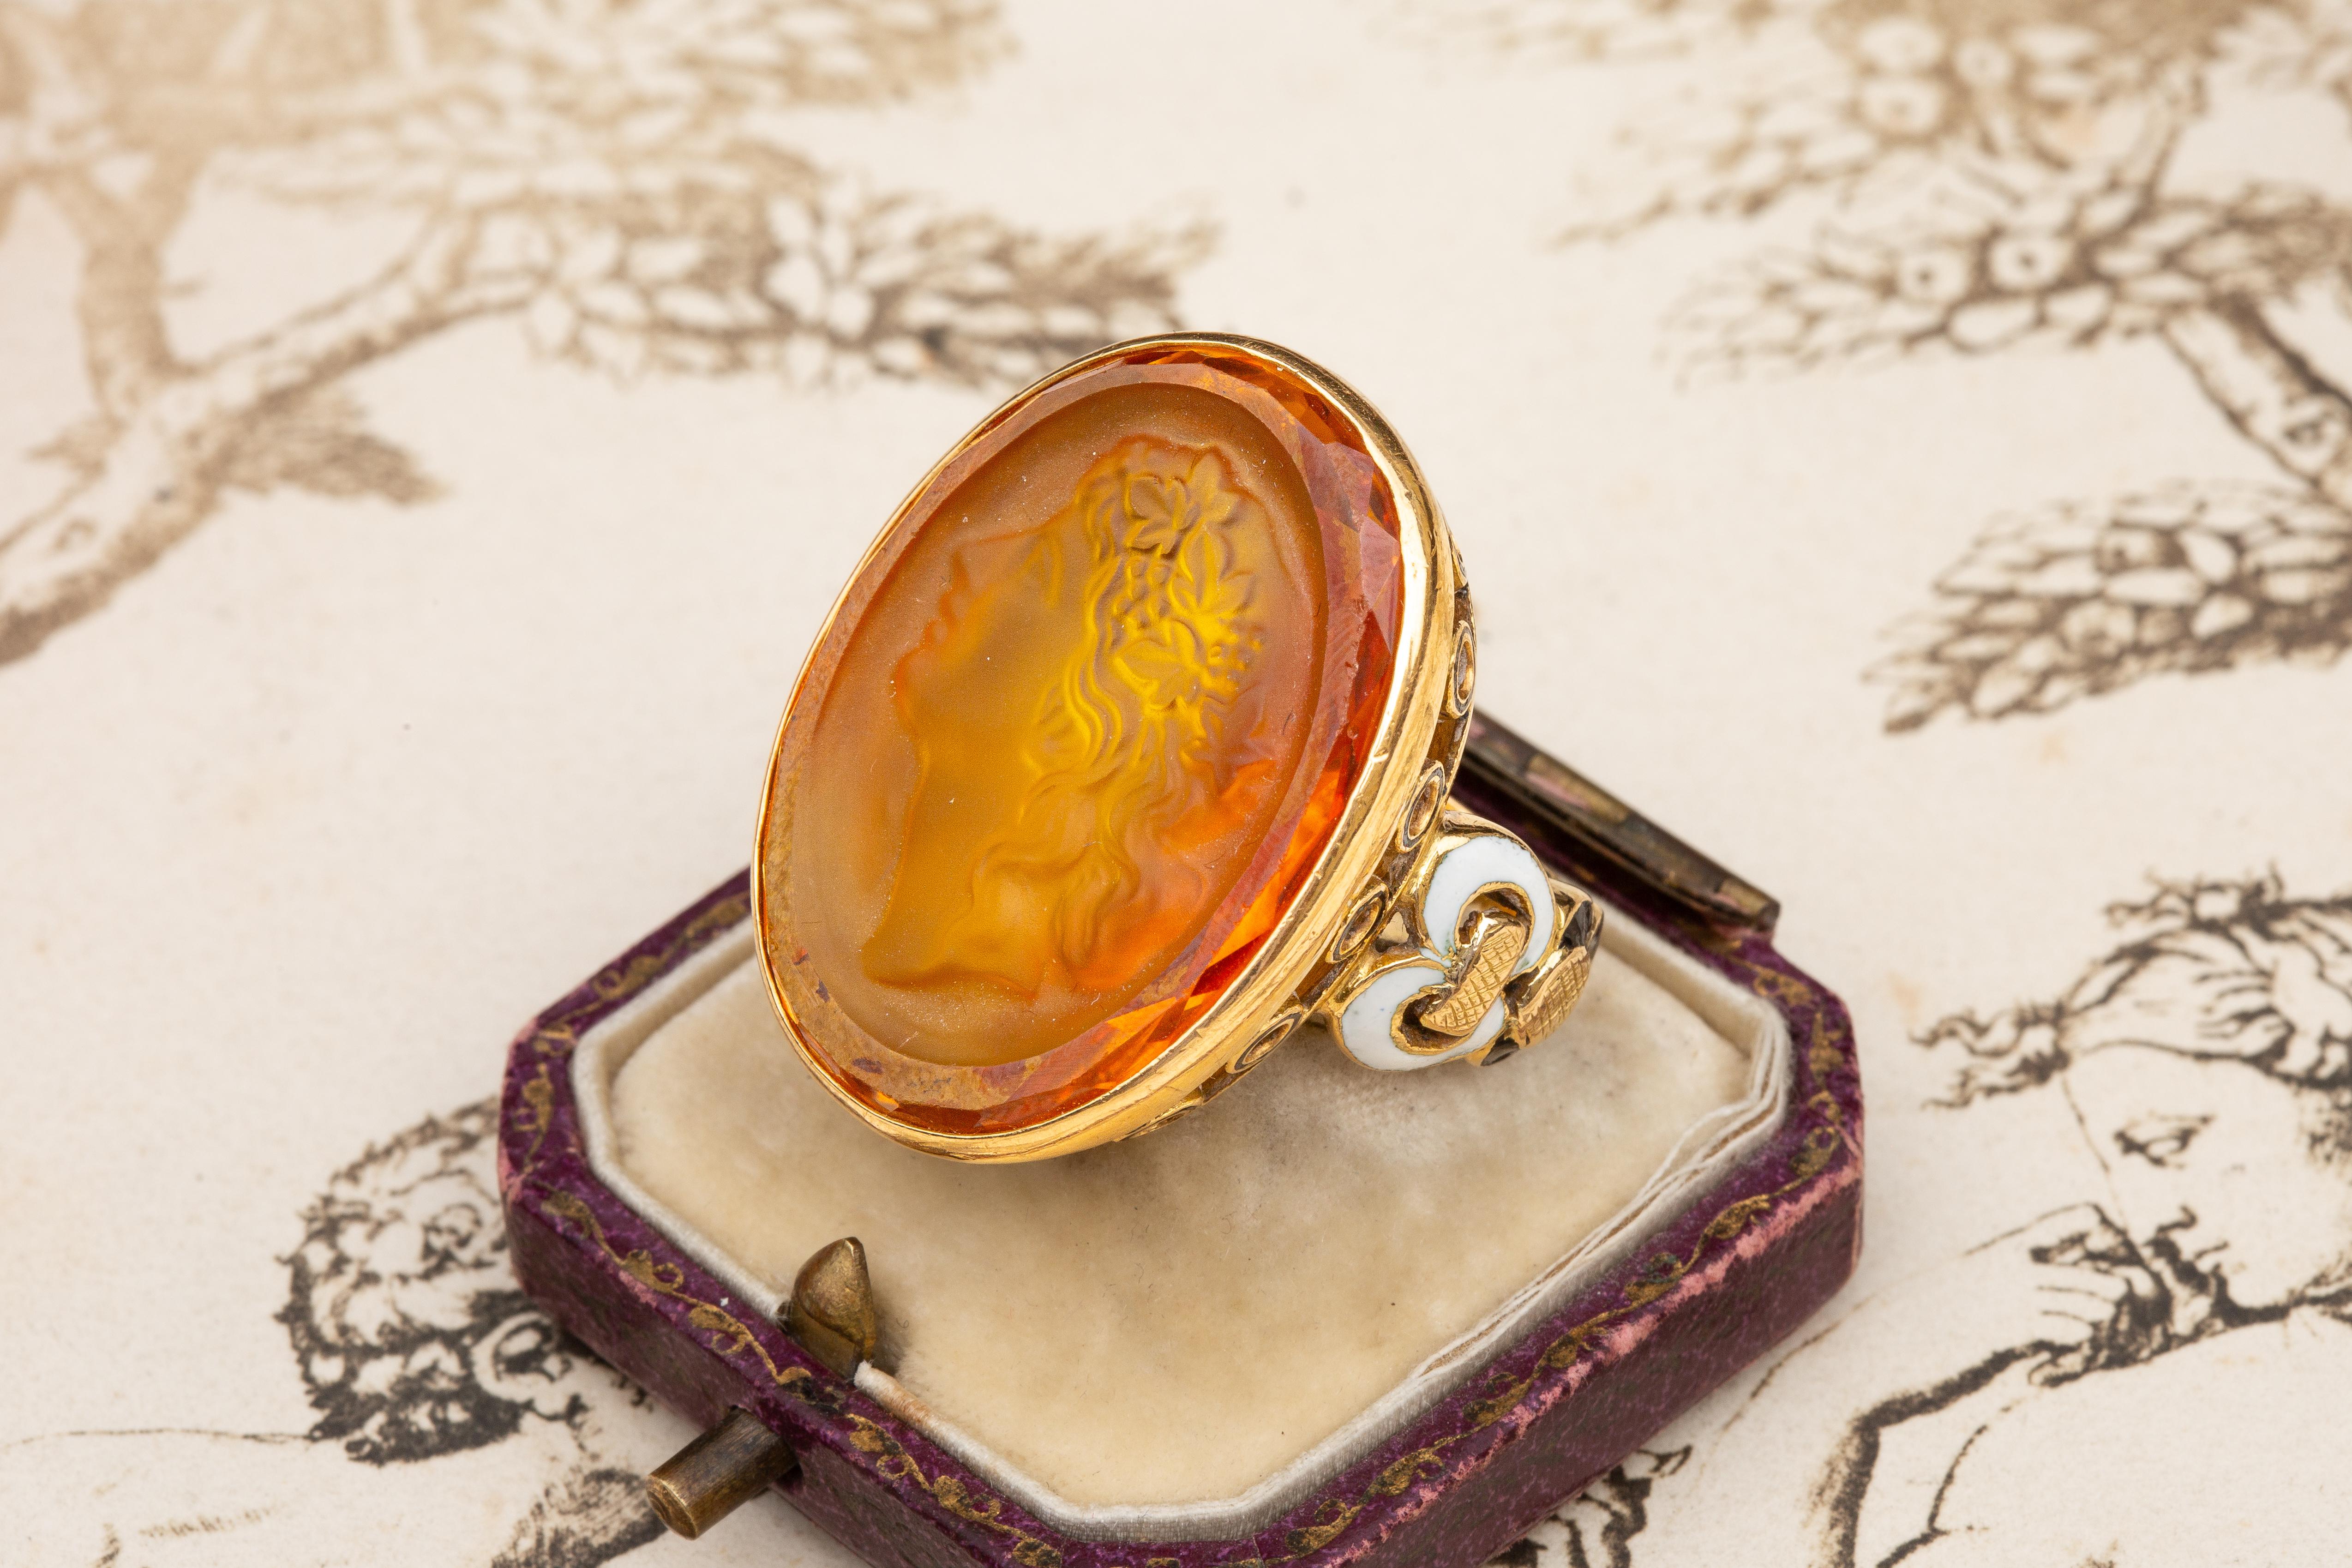 A superb and unusual glass cameo ring made in Paris, circa 1960. The ring is rather large in scale, crafted in 18K gold and weighing a seriously impressive 29 grams. In the centre rests a bright orange “pate de verre” (moulded glass paste) cameo